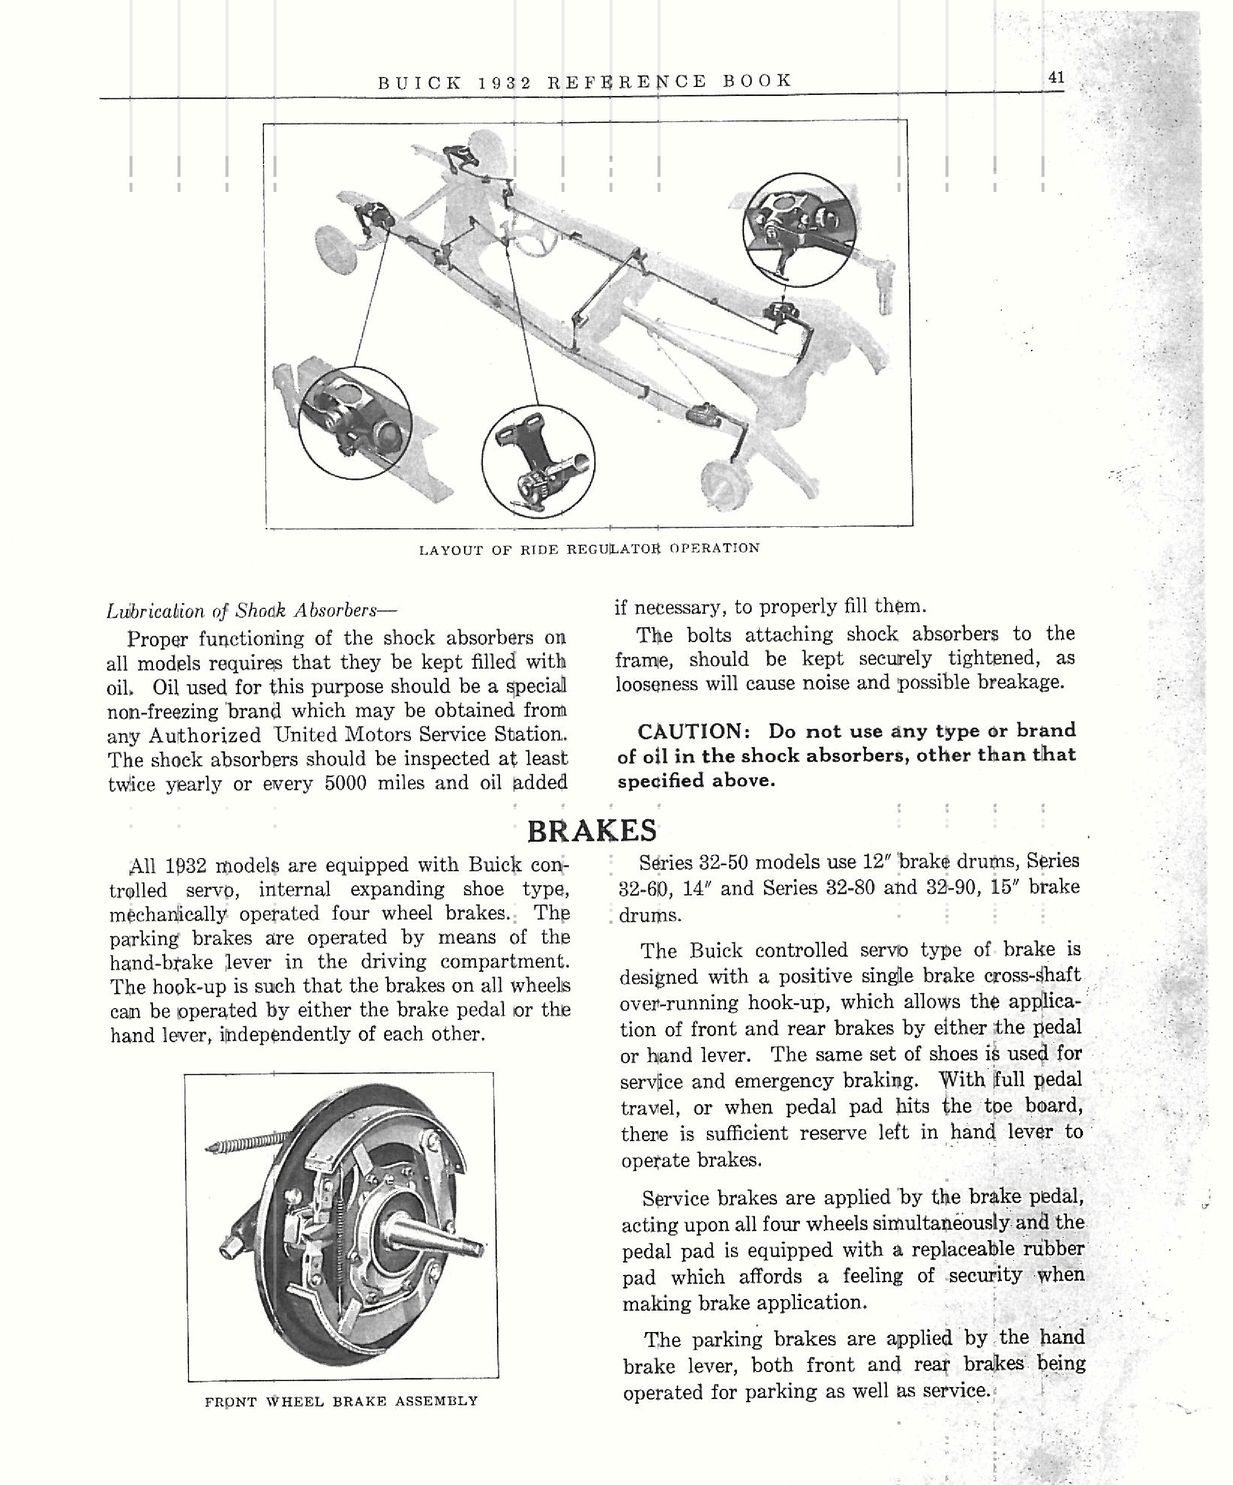 1932 Buick Reference Book-41